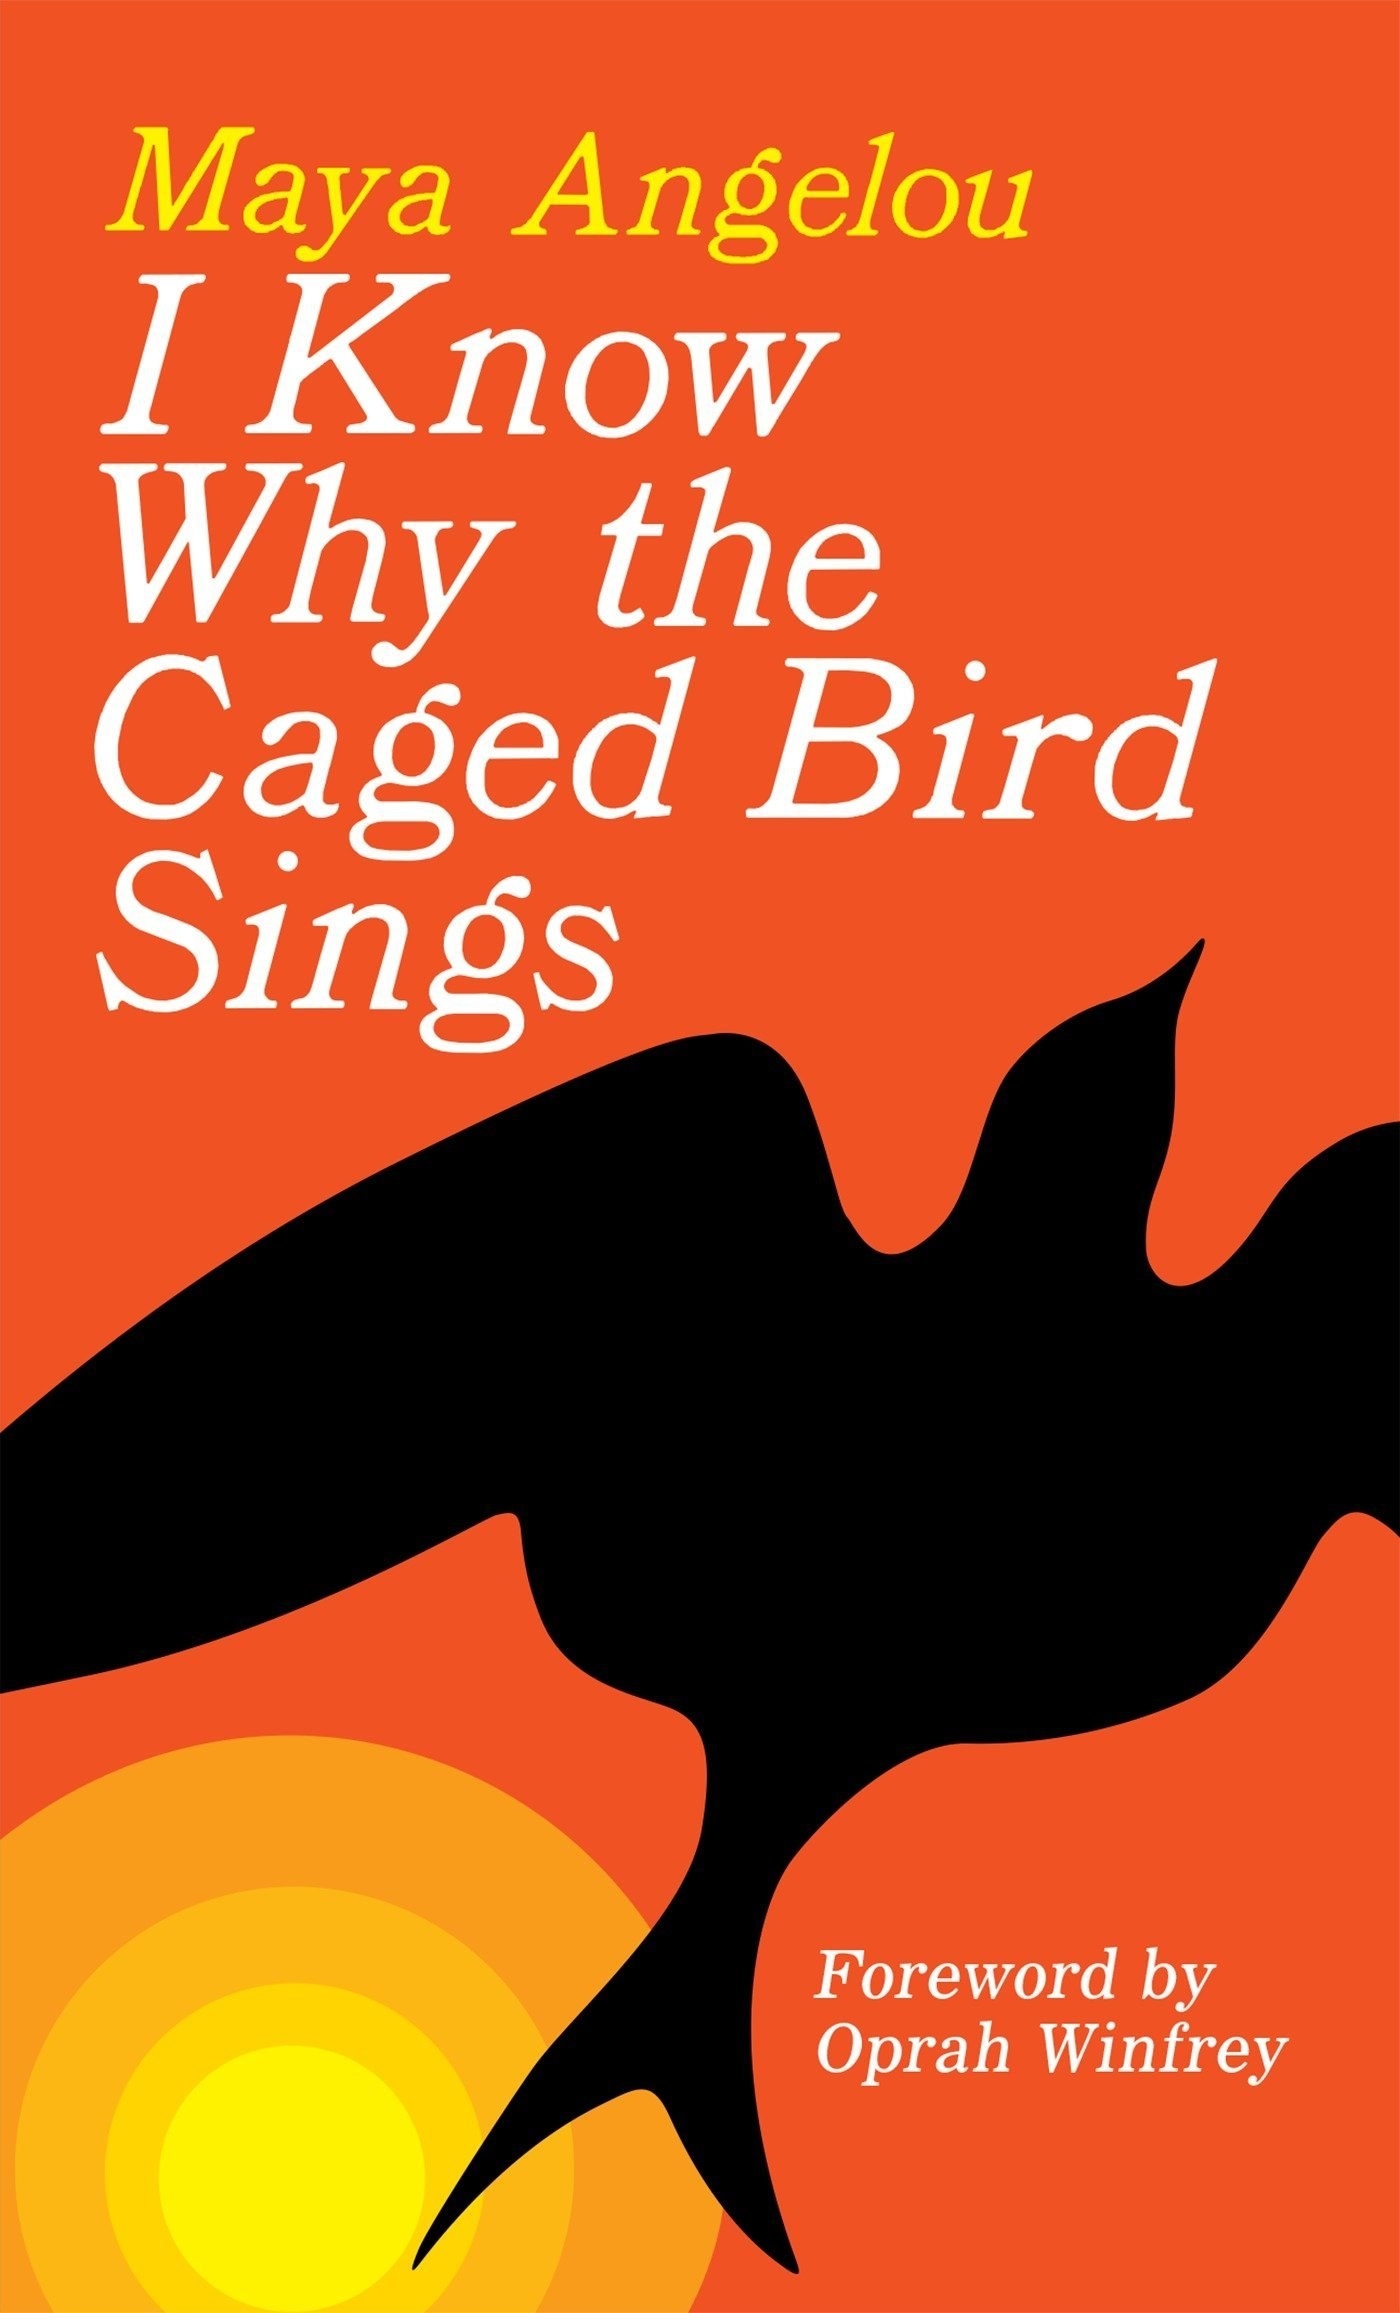 The cover of &quot;I Know Why the Caged Bird Sings&quot; by Maya Angelou